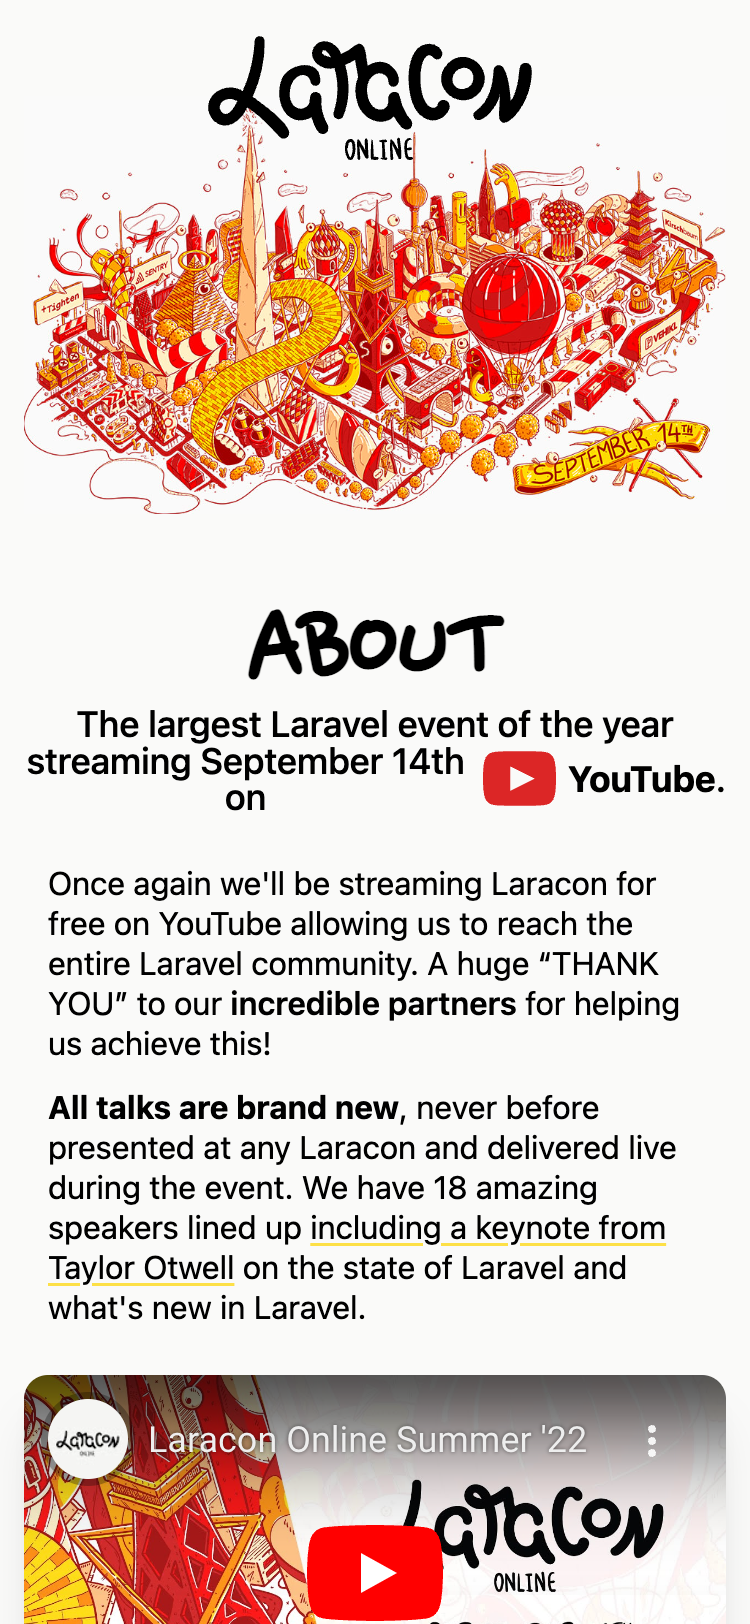 Mobile screenshot of the 'About' section of the Laracon Online website. At the top of the page is the Laracon Online logo and a detailed illustration of a fantastical make believe city. The section explains what Laracon Online is, followed by an embedded YouTube video.